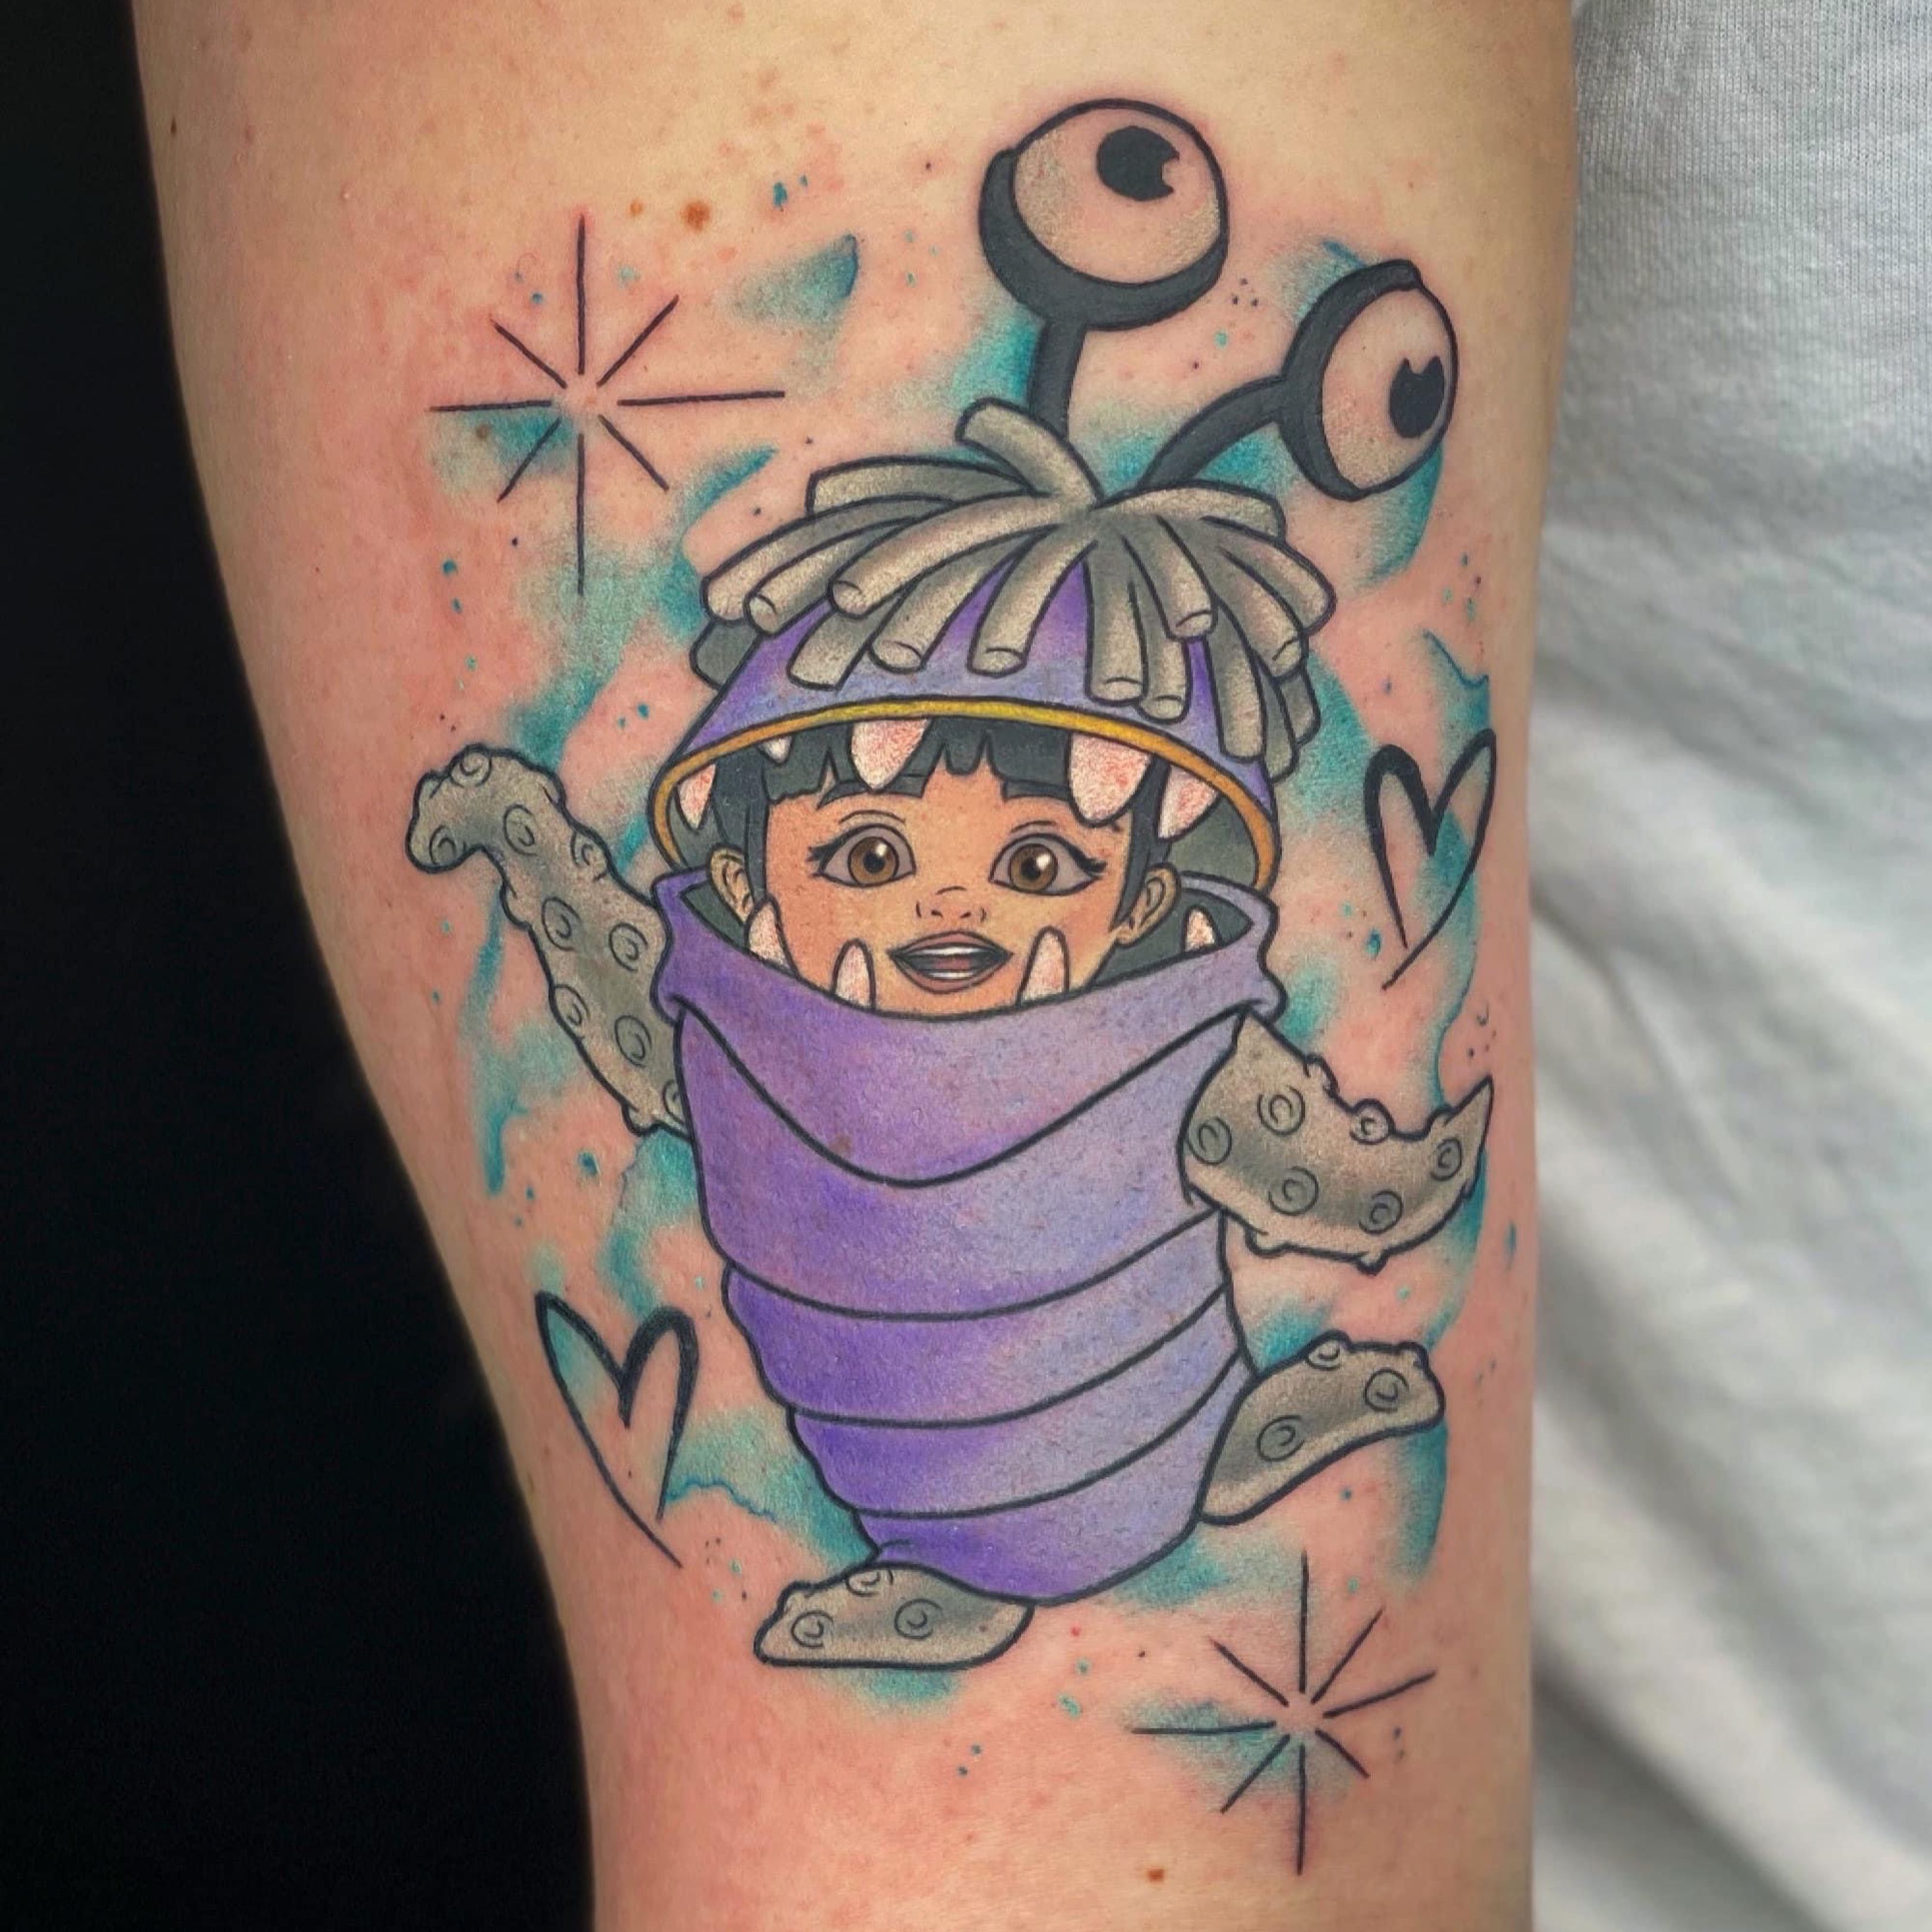 Hannah Mai Tattoo on Instagram Monsters inc piece based off some Tokyo  Disney references leighlaloves  Disney tattoos Disney inspired tattoos  Cartoon tattoos